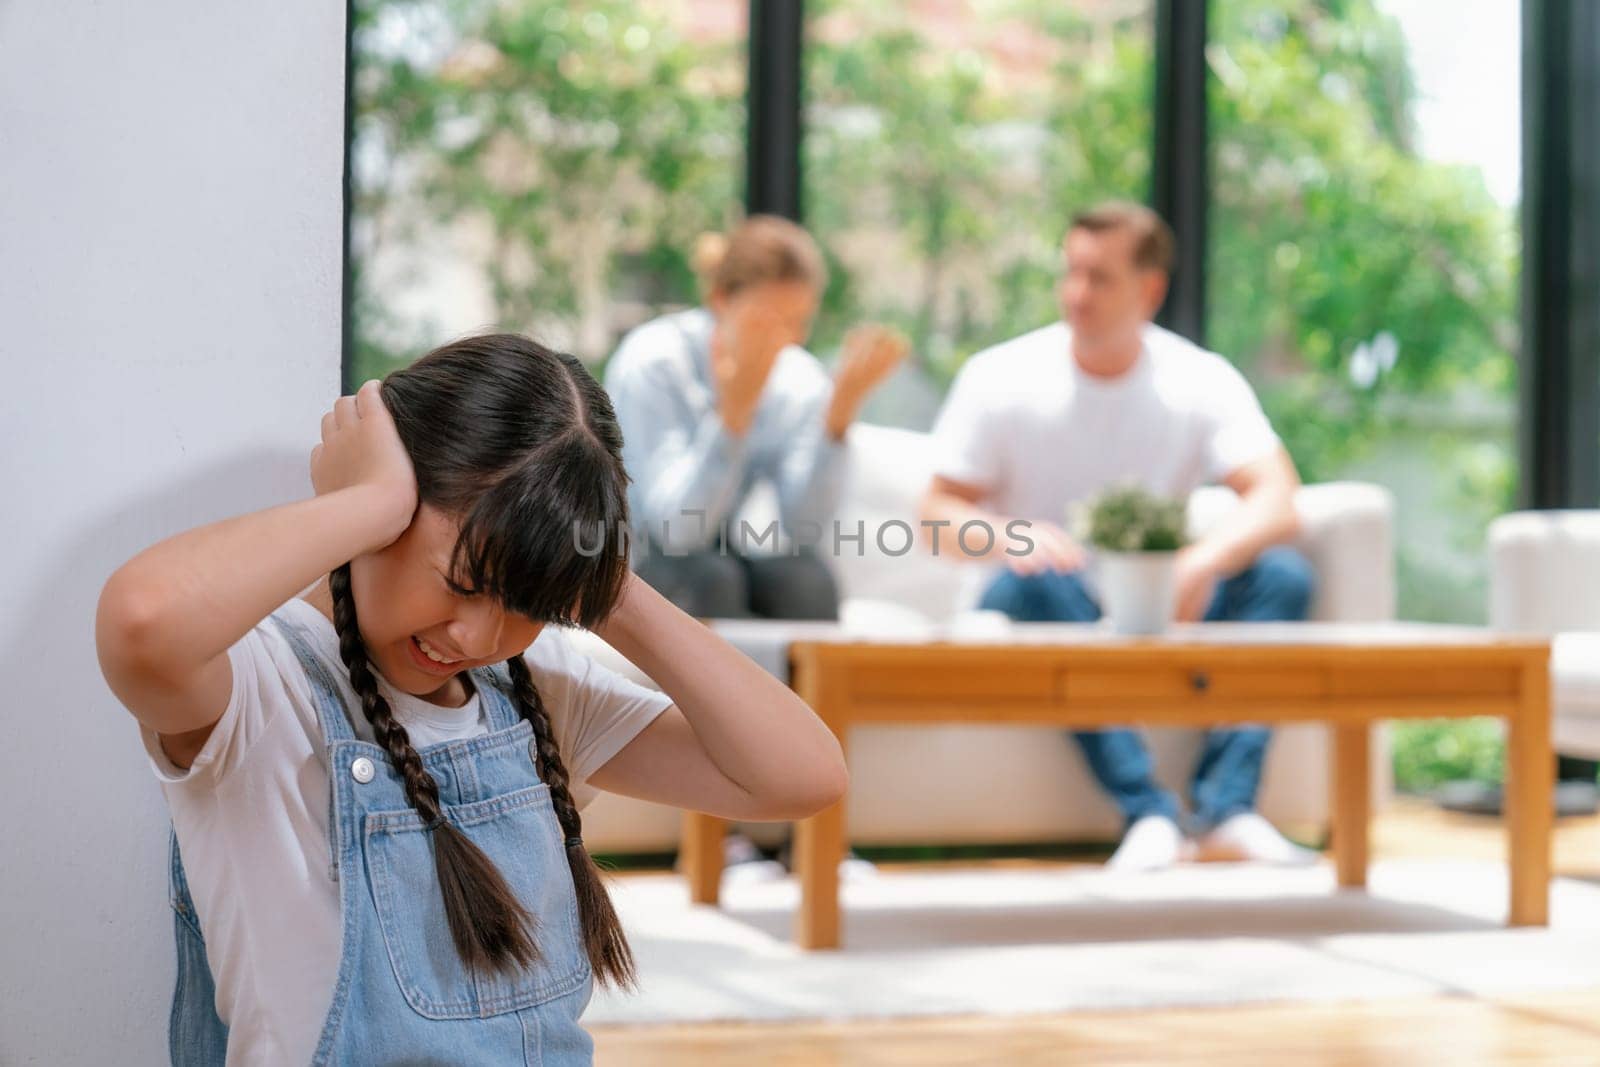 Stressed and unhappy girl huddle in corner, cover her ears with painful expression while her parent arguing in background. Domestic violence and traumatic childhood develop to depression. Synchronos